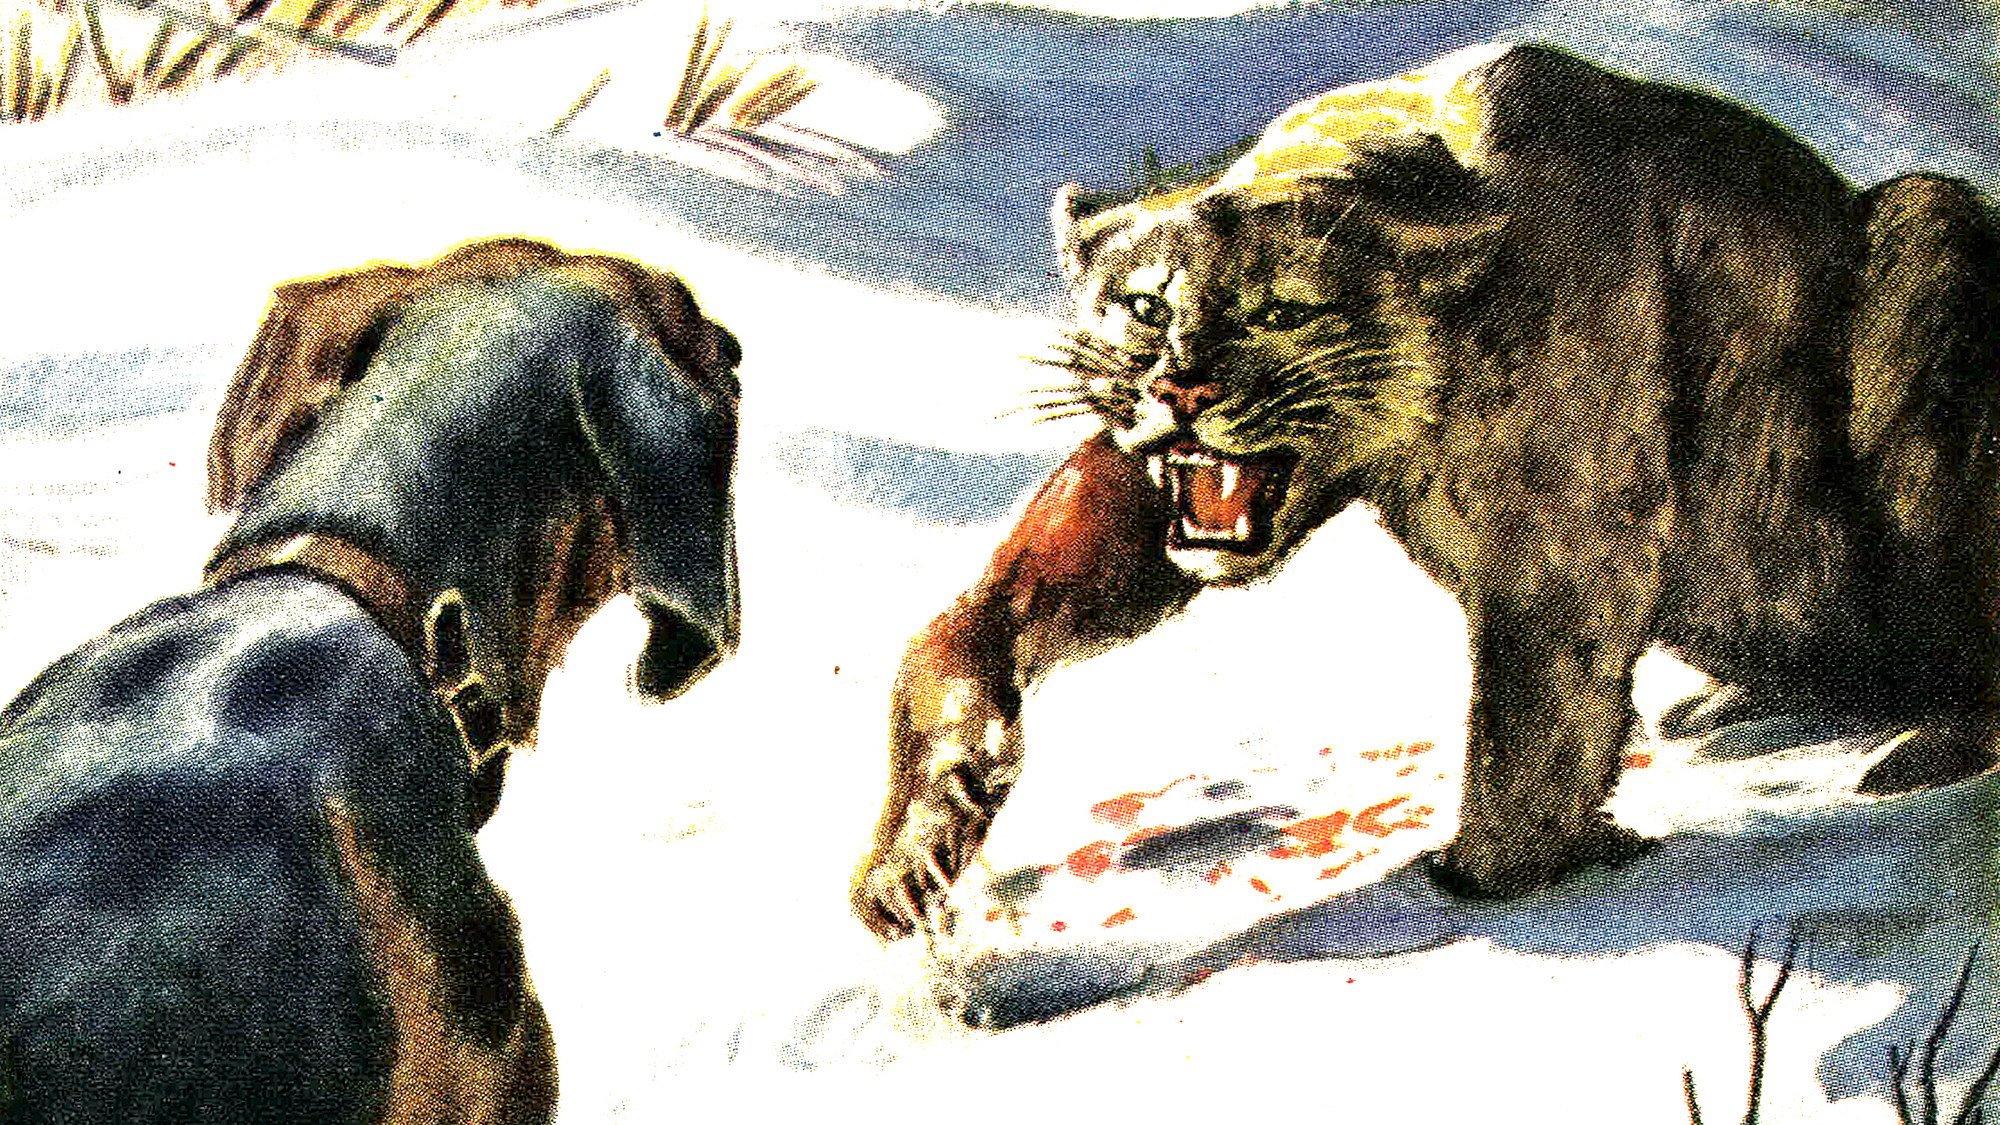 A bloody cougar faces off with a hound dog.